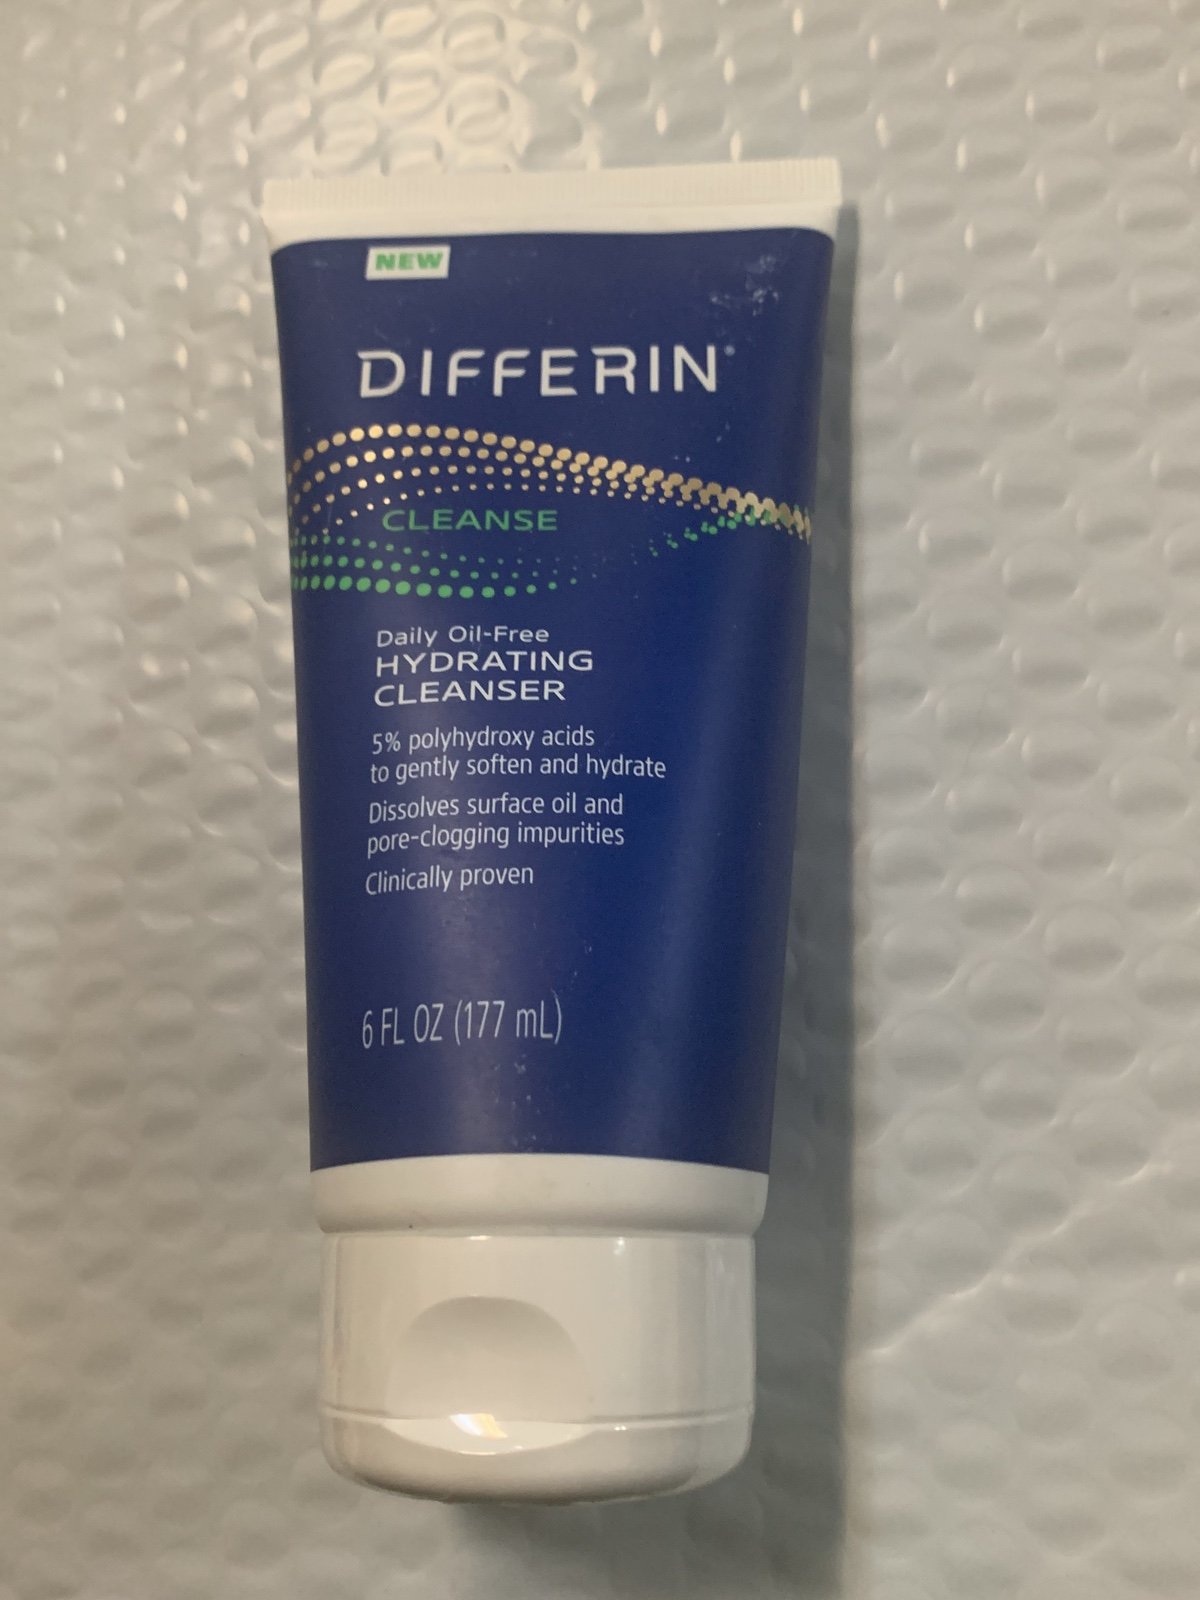 Differing Daily Oil-Free Hydrating Cleanser, 6 fl oz (1